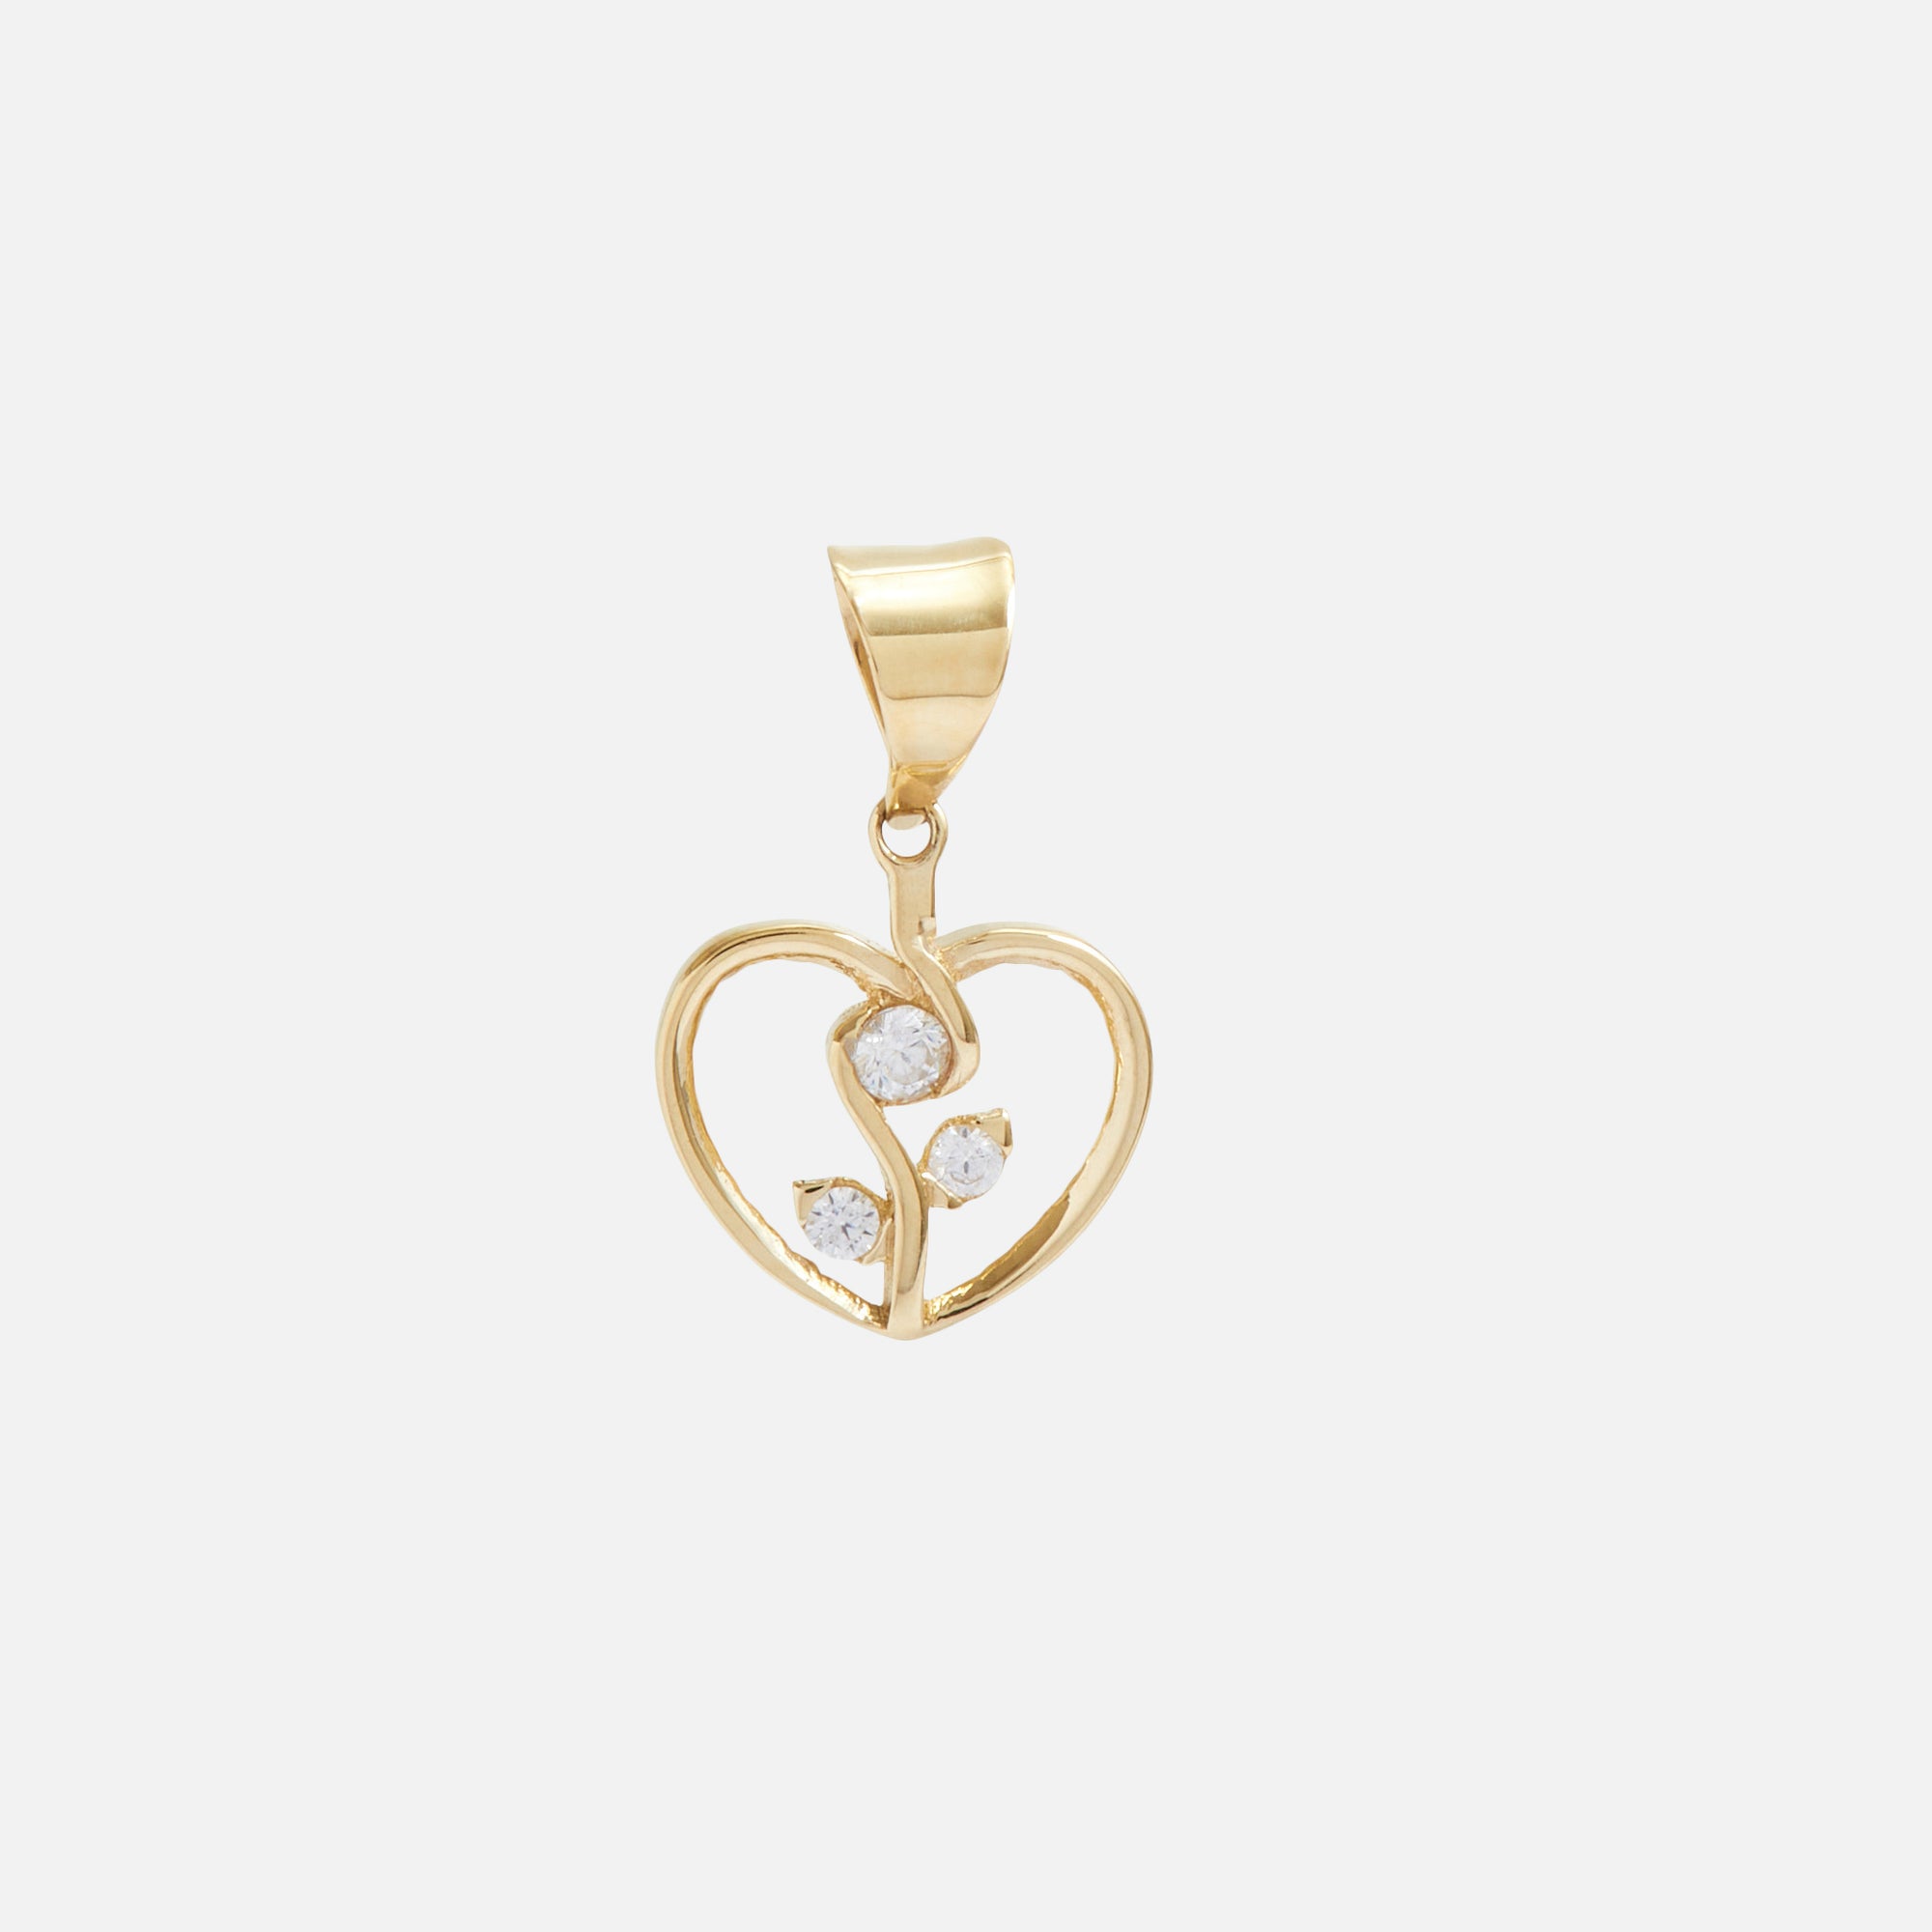 10k yellow gold heart with flower charm